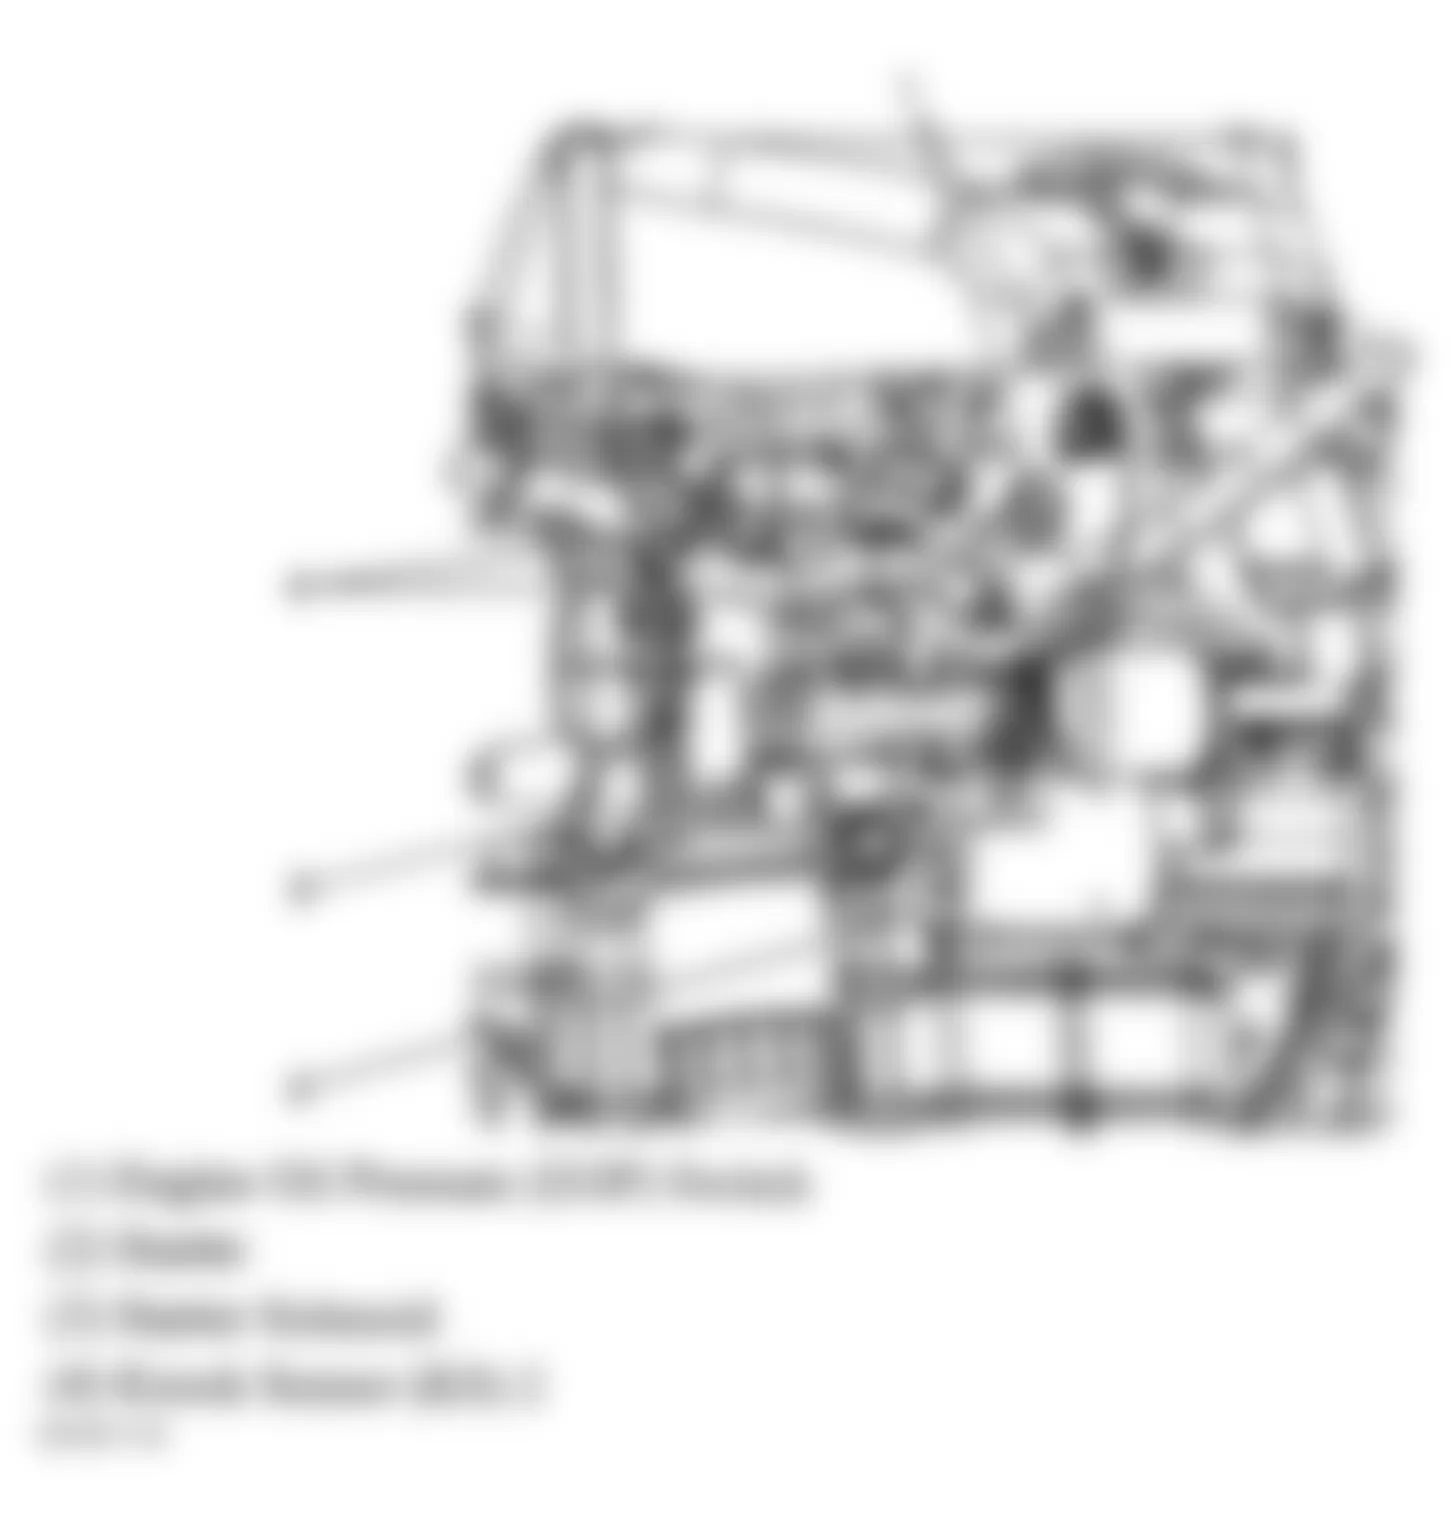 Chevrolet Malibu Maxx SS 2006 - Component Locations -  Lower Left Side Of Engine (3.5L)